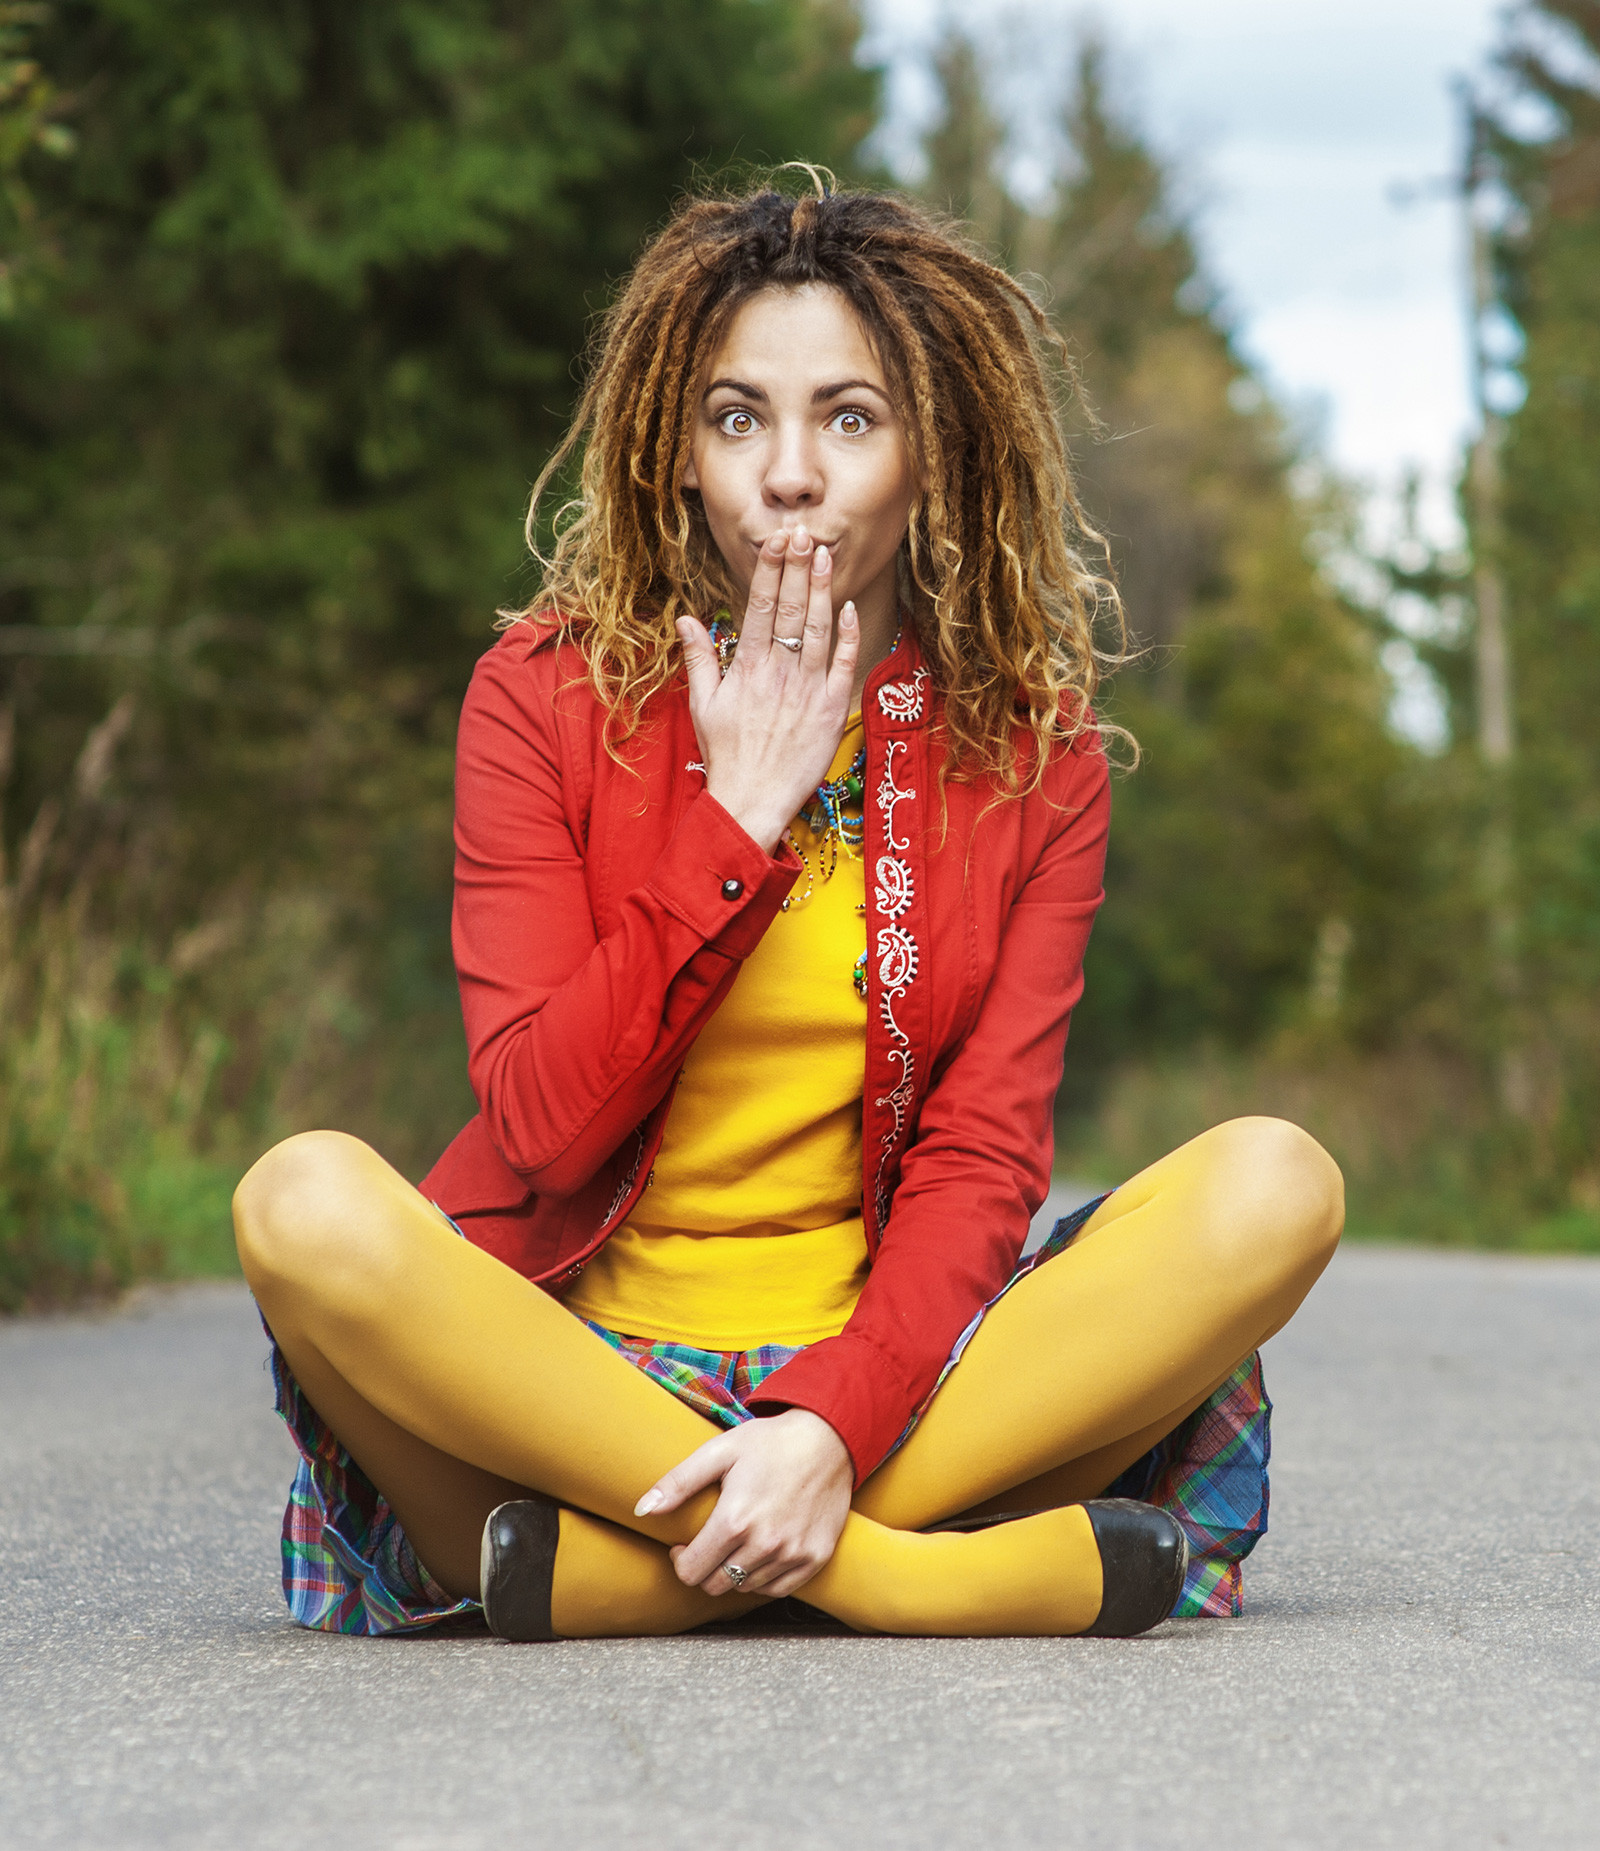 A young, colorful woman with dreadlocks in shock.